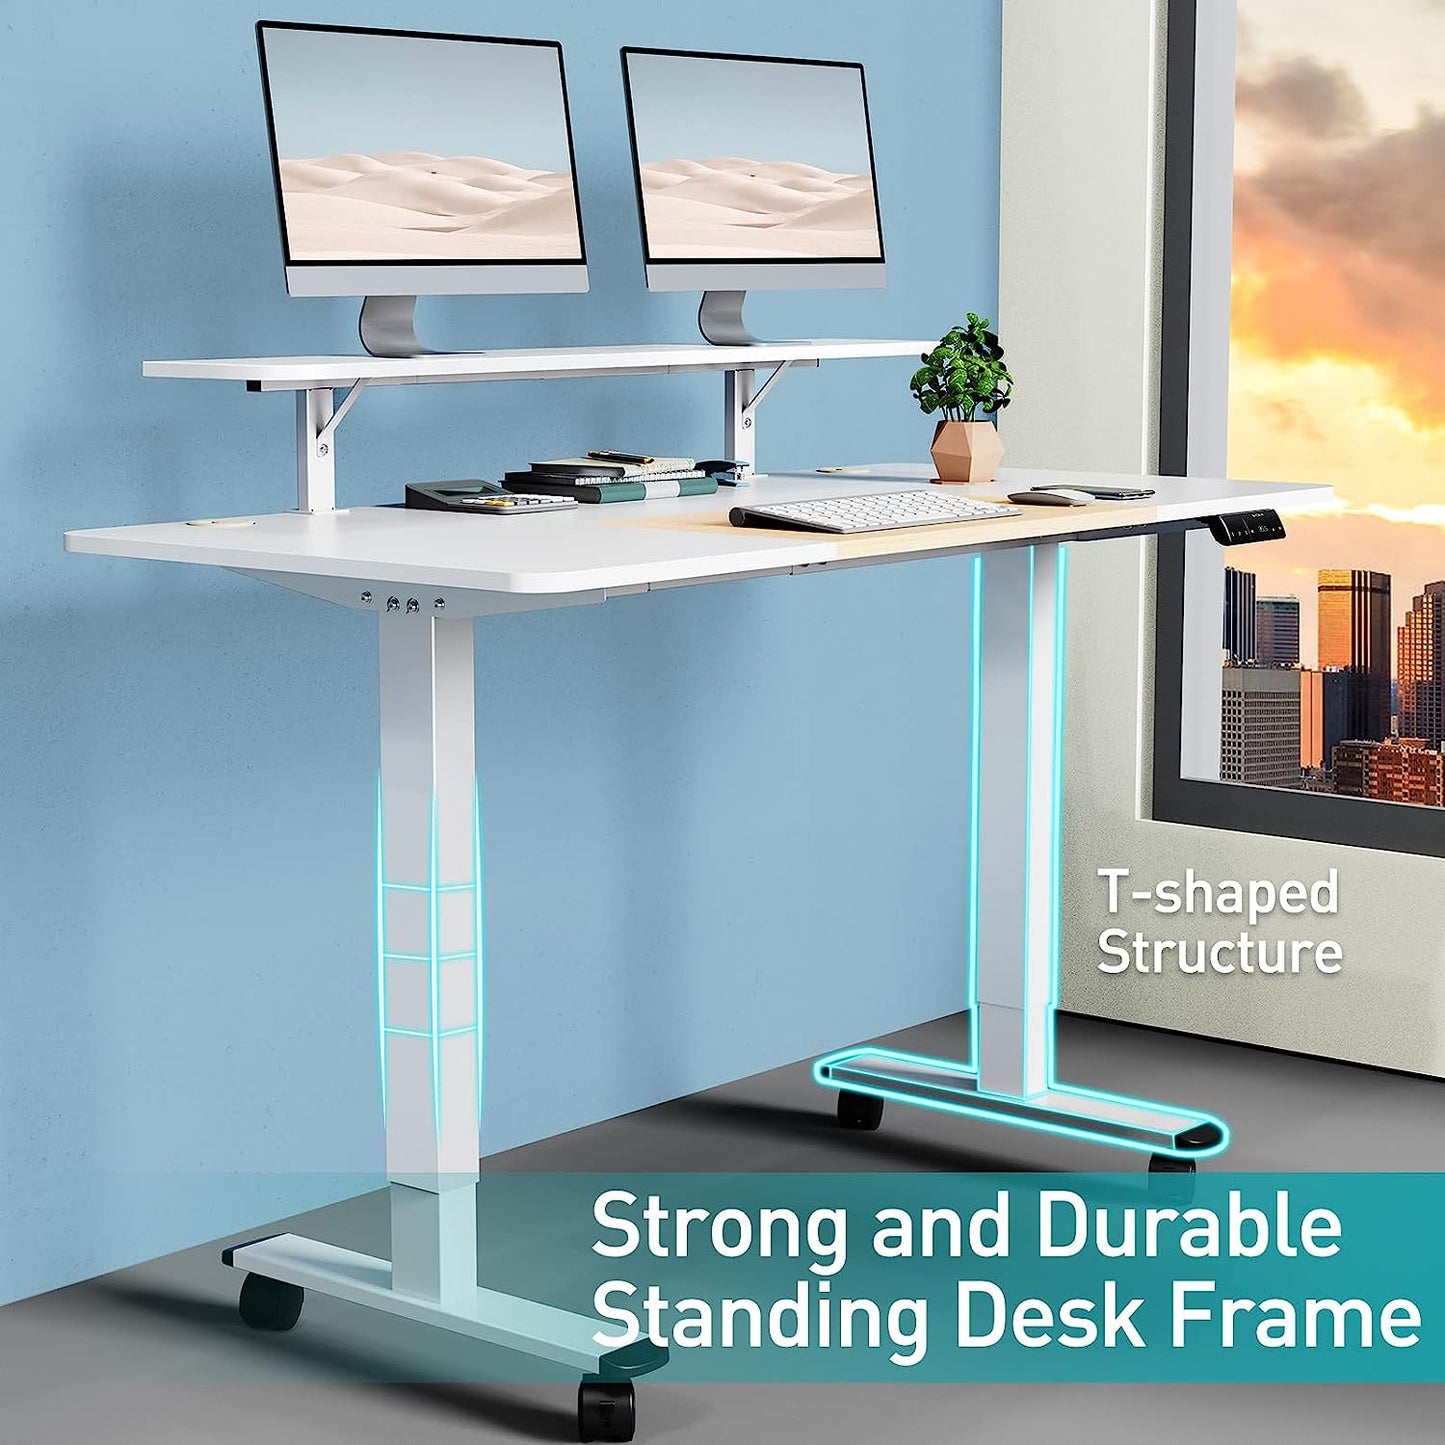 WOKA 55 x 28 Inch Electric Standing Desk with Wheels, Height Adjustable Stand up Desk with a Monitor Stand Riser, Standing Computer Desk with Memory Controllers, Adjustable Desks for Home Office